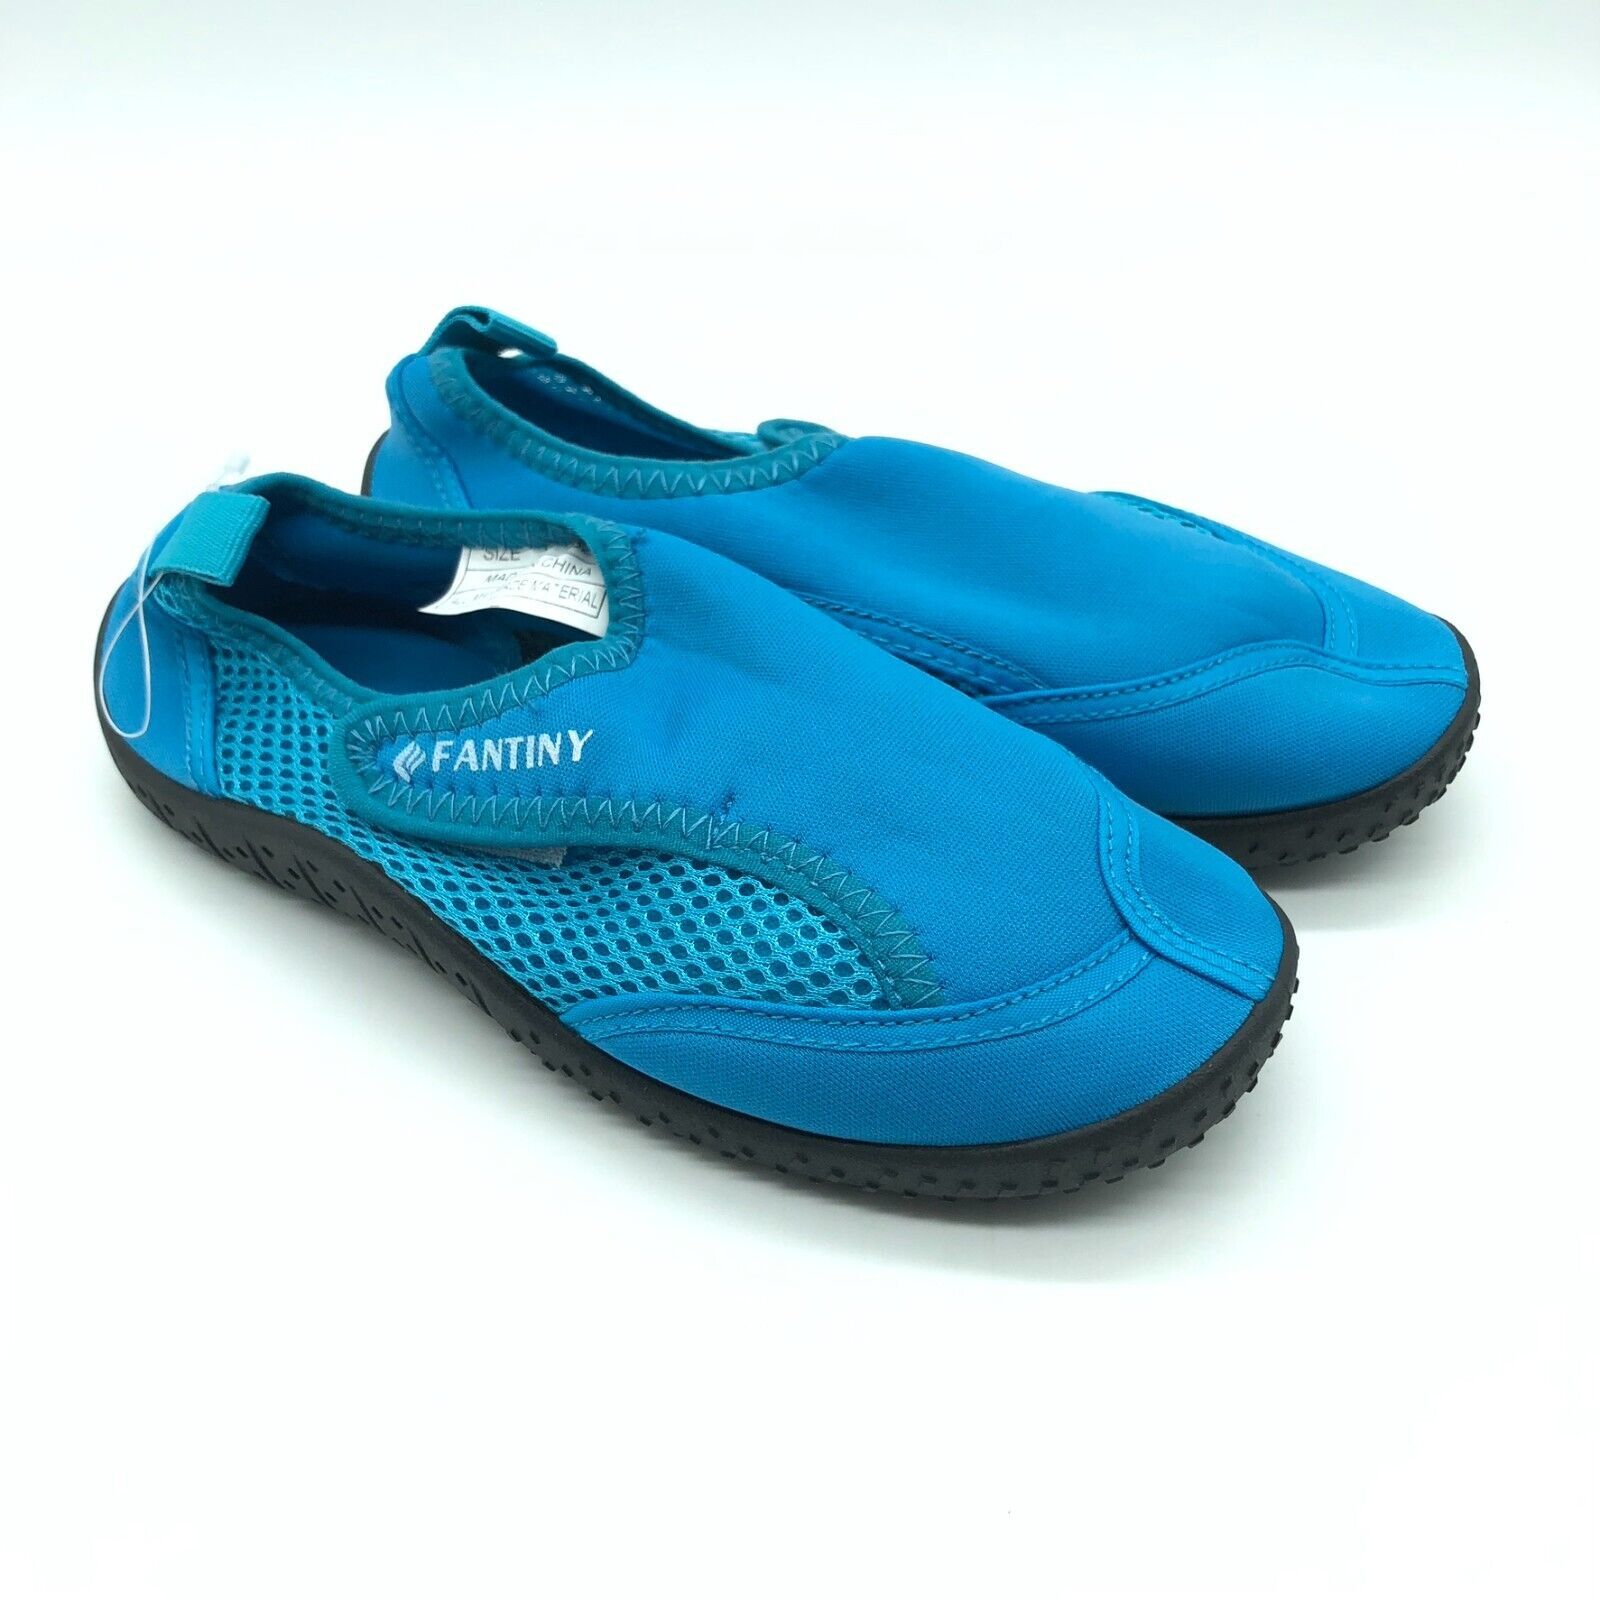 Primary image for Fantiny Boys Water Shoes Hook & Loop Mesh Fabric Blue Size 32 US 1